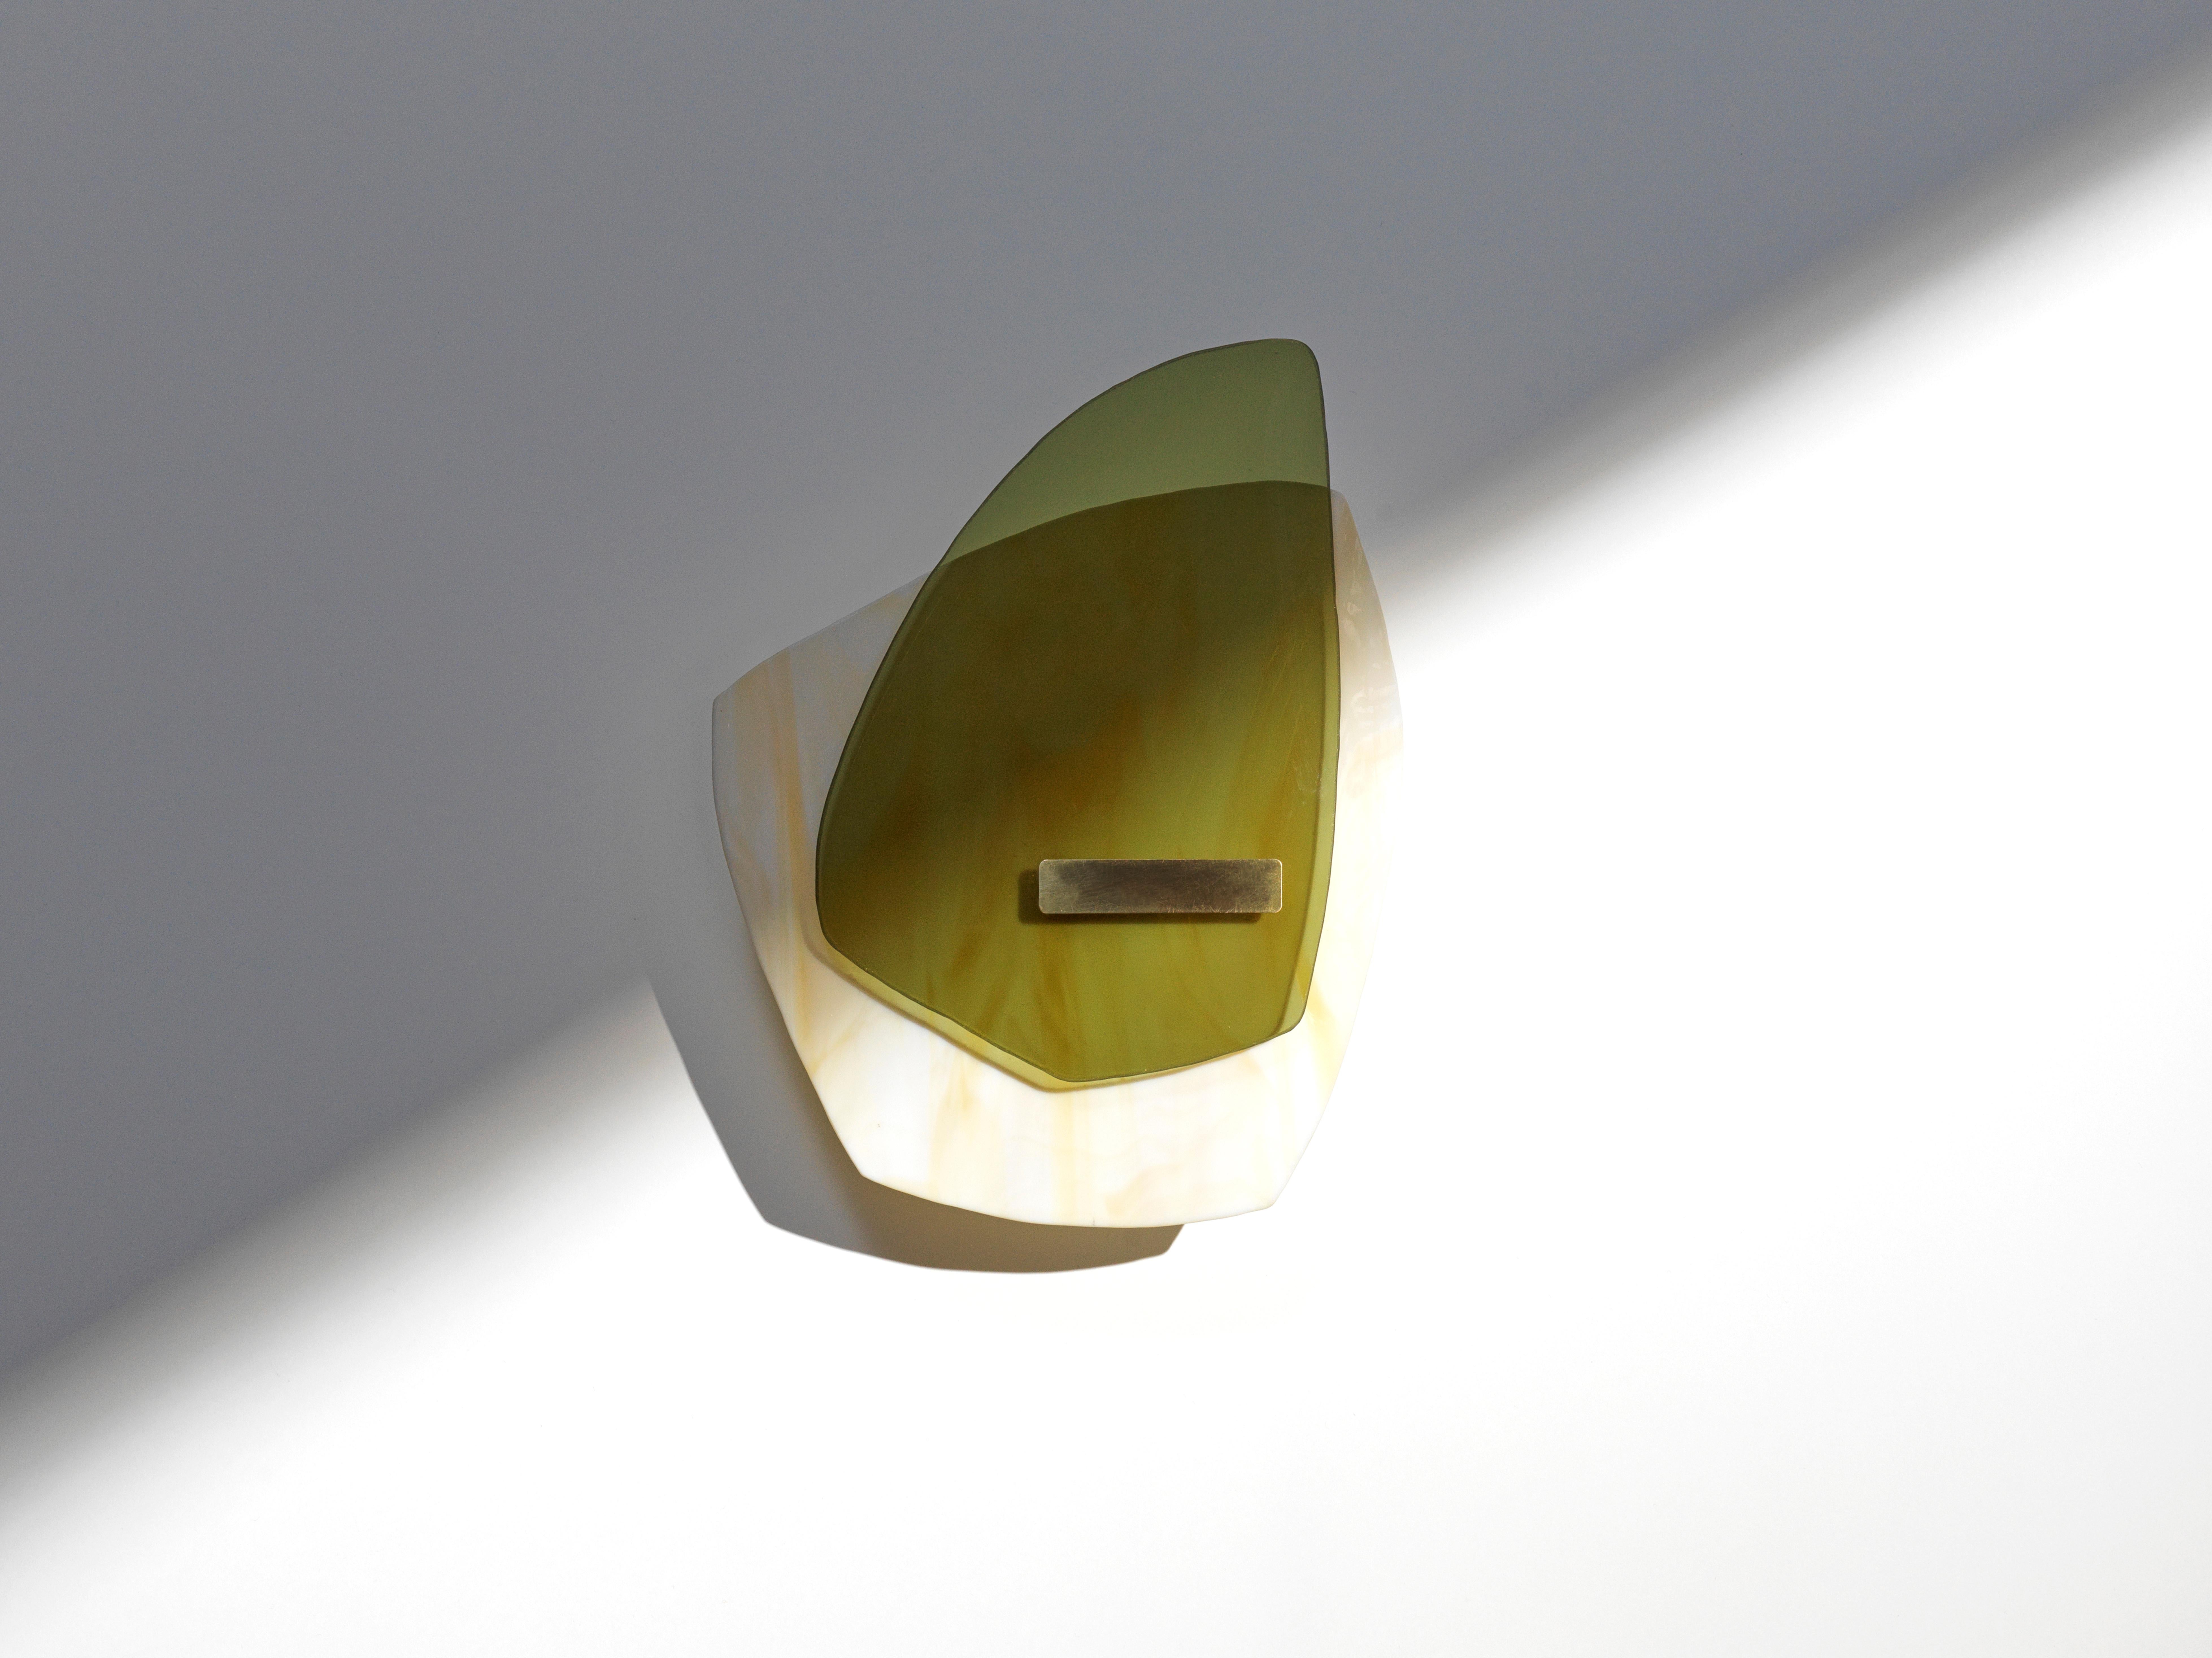 Alliance 03 light sculpture by Marie Jeunet.
Dimensions: H 35 x L 26 cm
Materials: Semi opaque ochre marbled glass, smooth olive green glass sheet, brushed brass structure and finish

Les Precieux 
These luminous sculptures evolve with the rhythm of